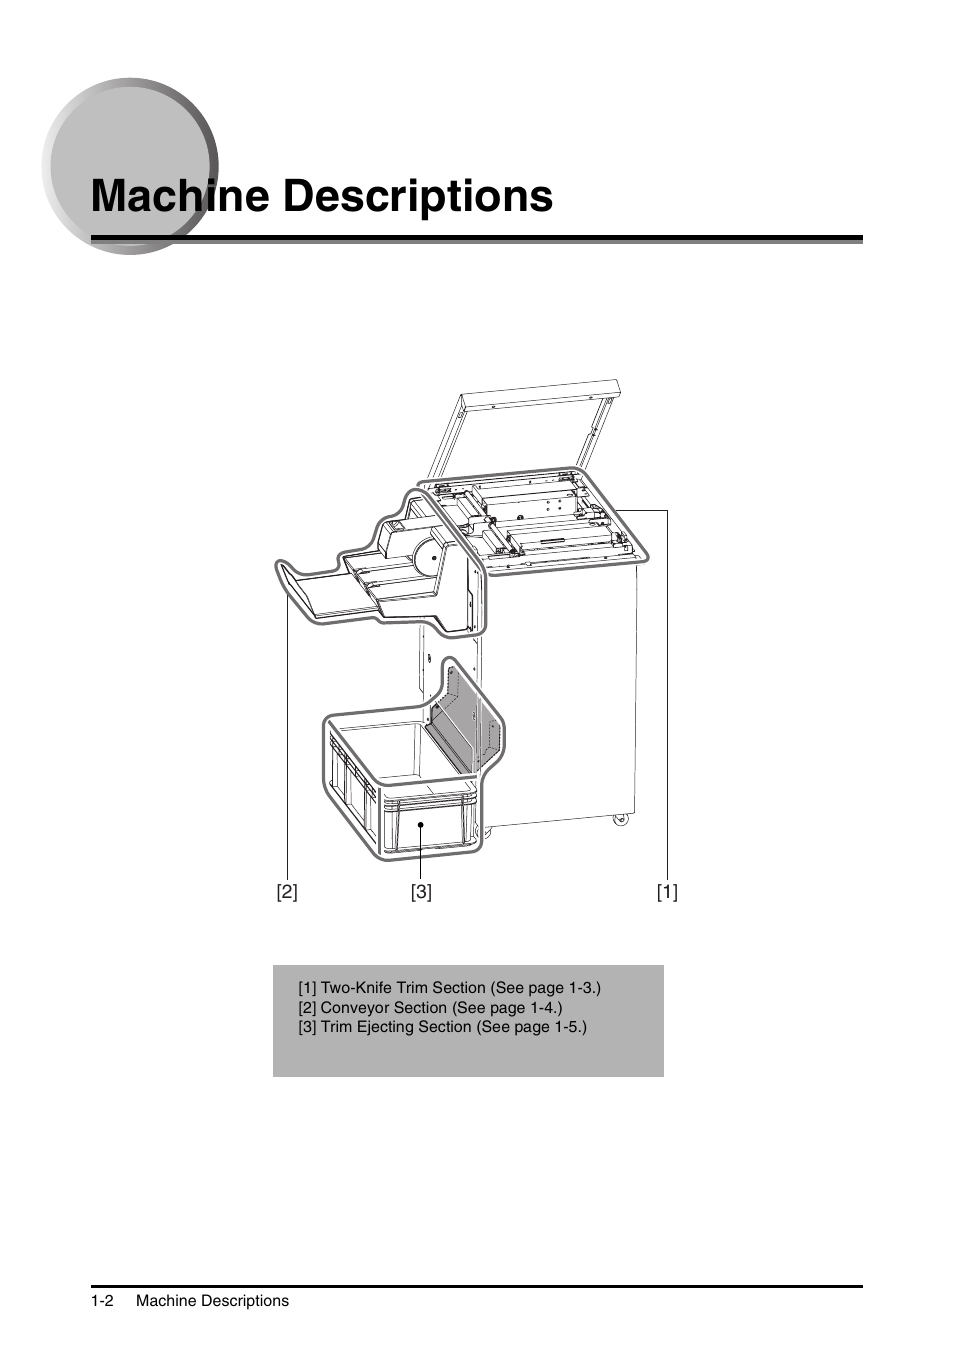 Machine descriptions, Machine descriptions -2 | Canon Trimmer User Manual | Page 9 / 26